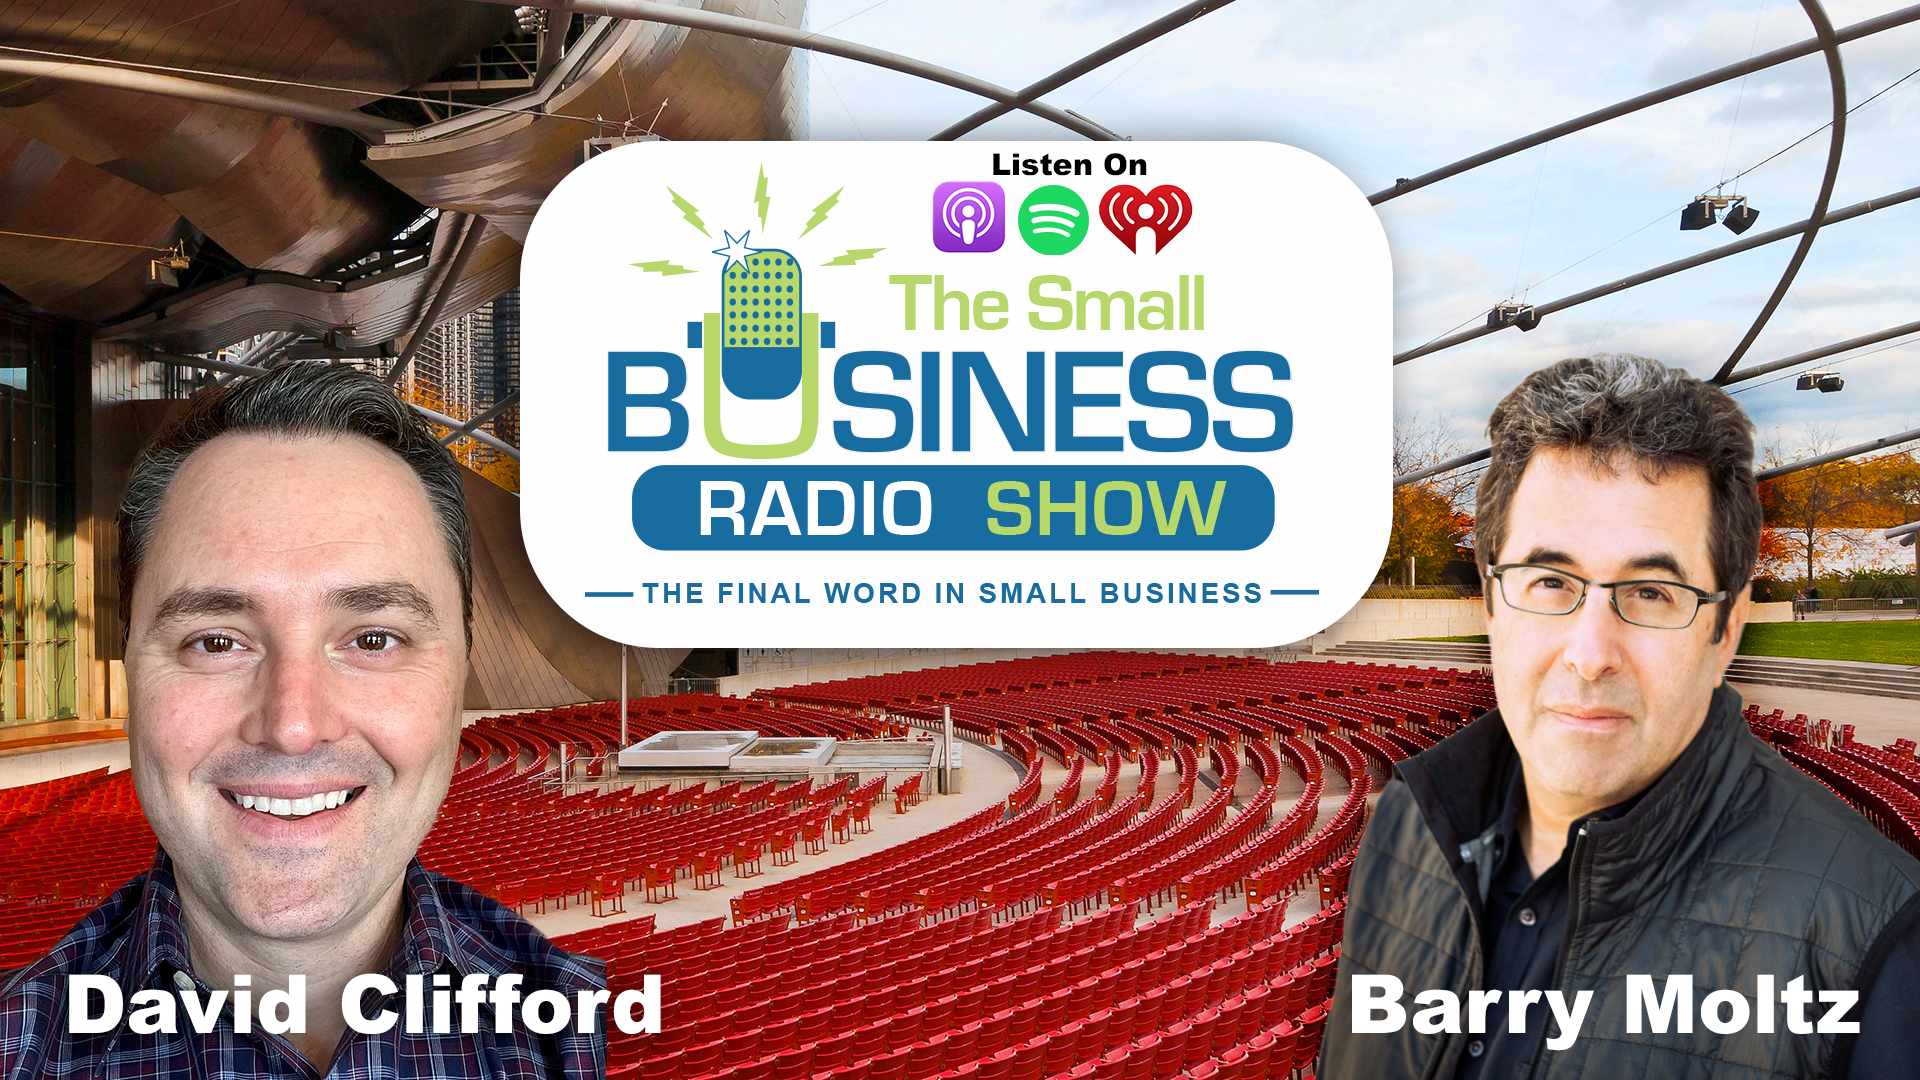 David Clifford on The Small Business Radio Show